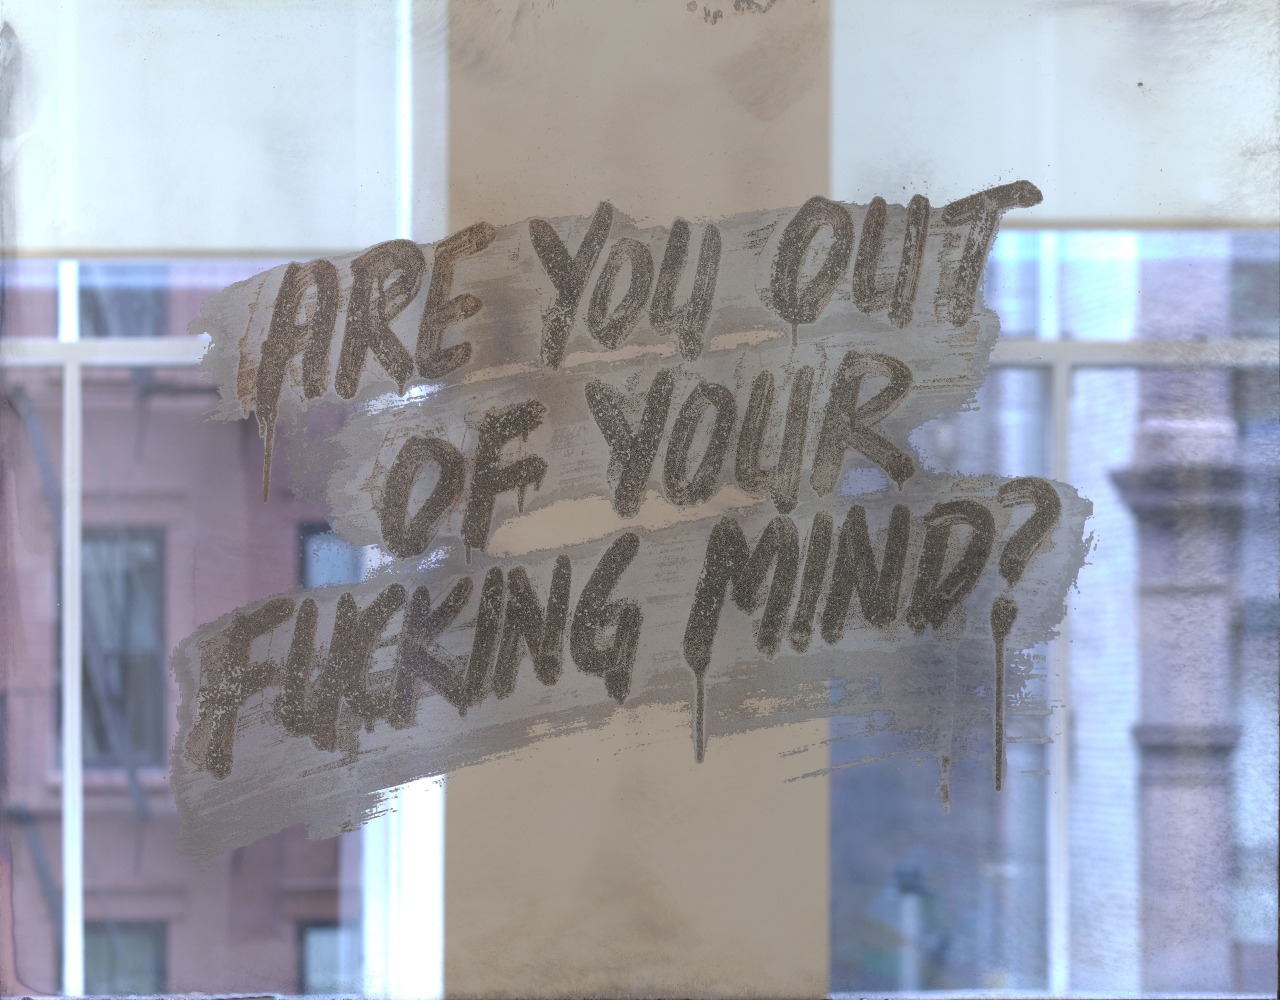 Are You Out Of Your Fucking Mind?, 2018
Etched and silvered glass
25 x 35 x 1 1/2 inches
Edition of 12